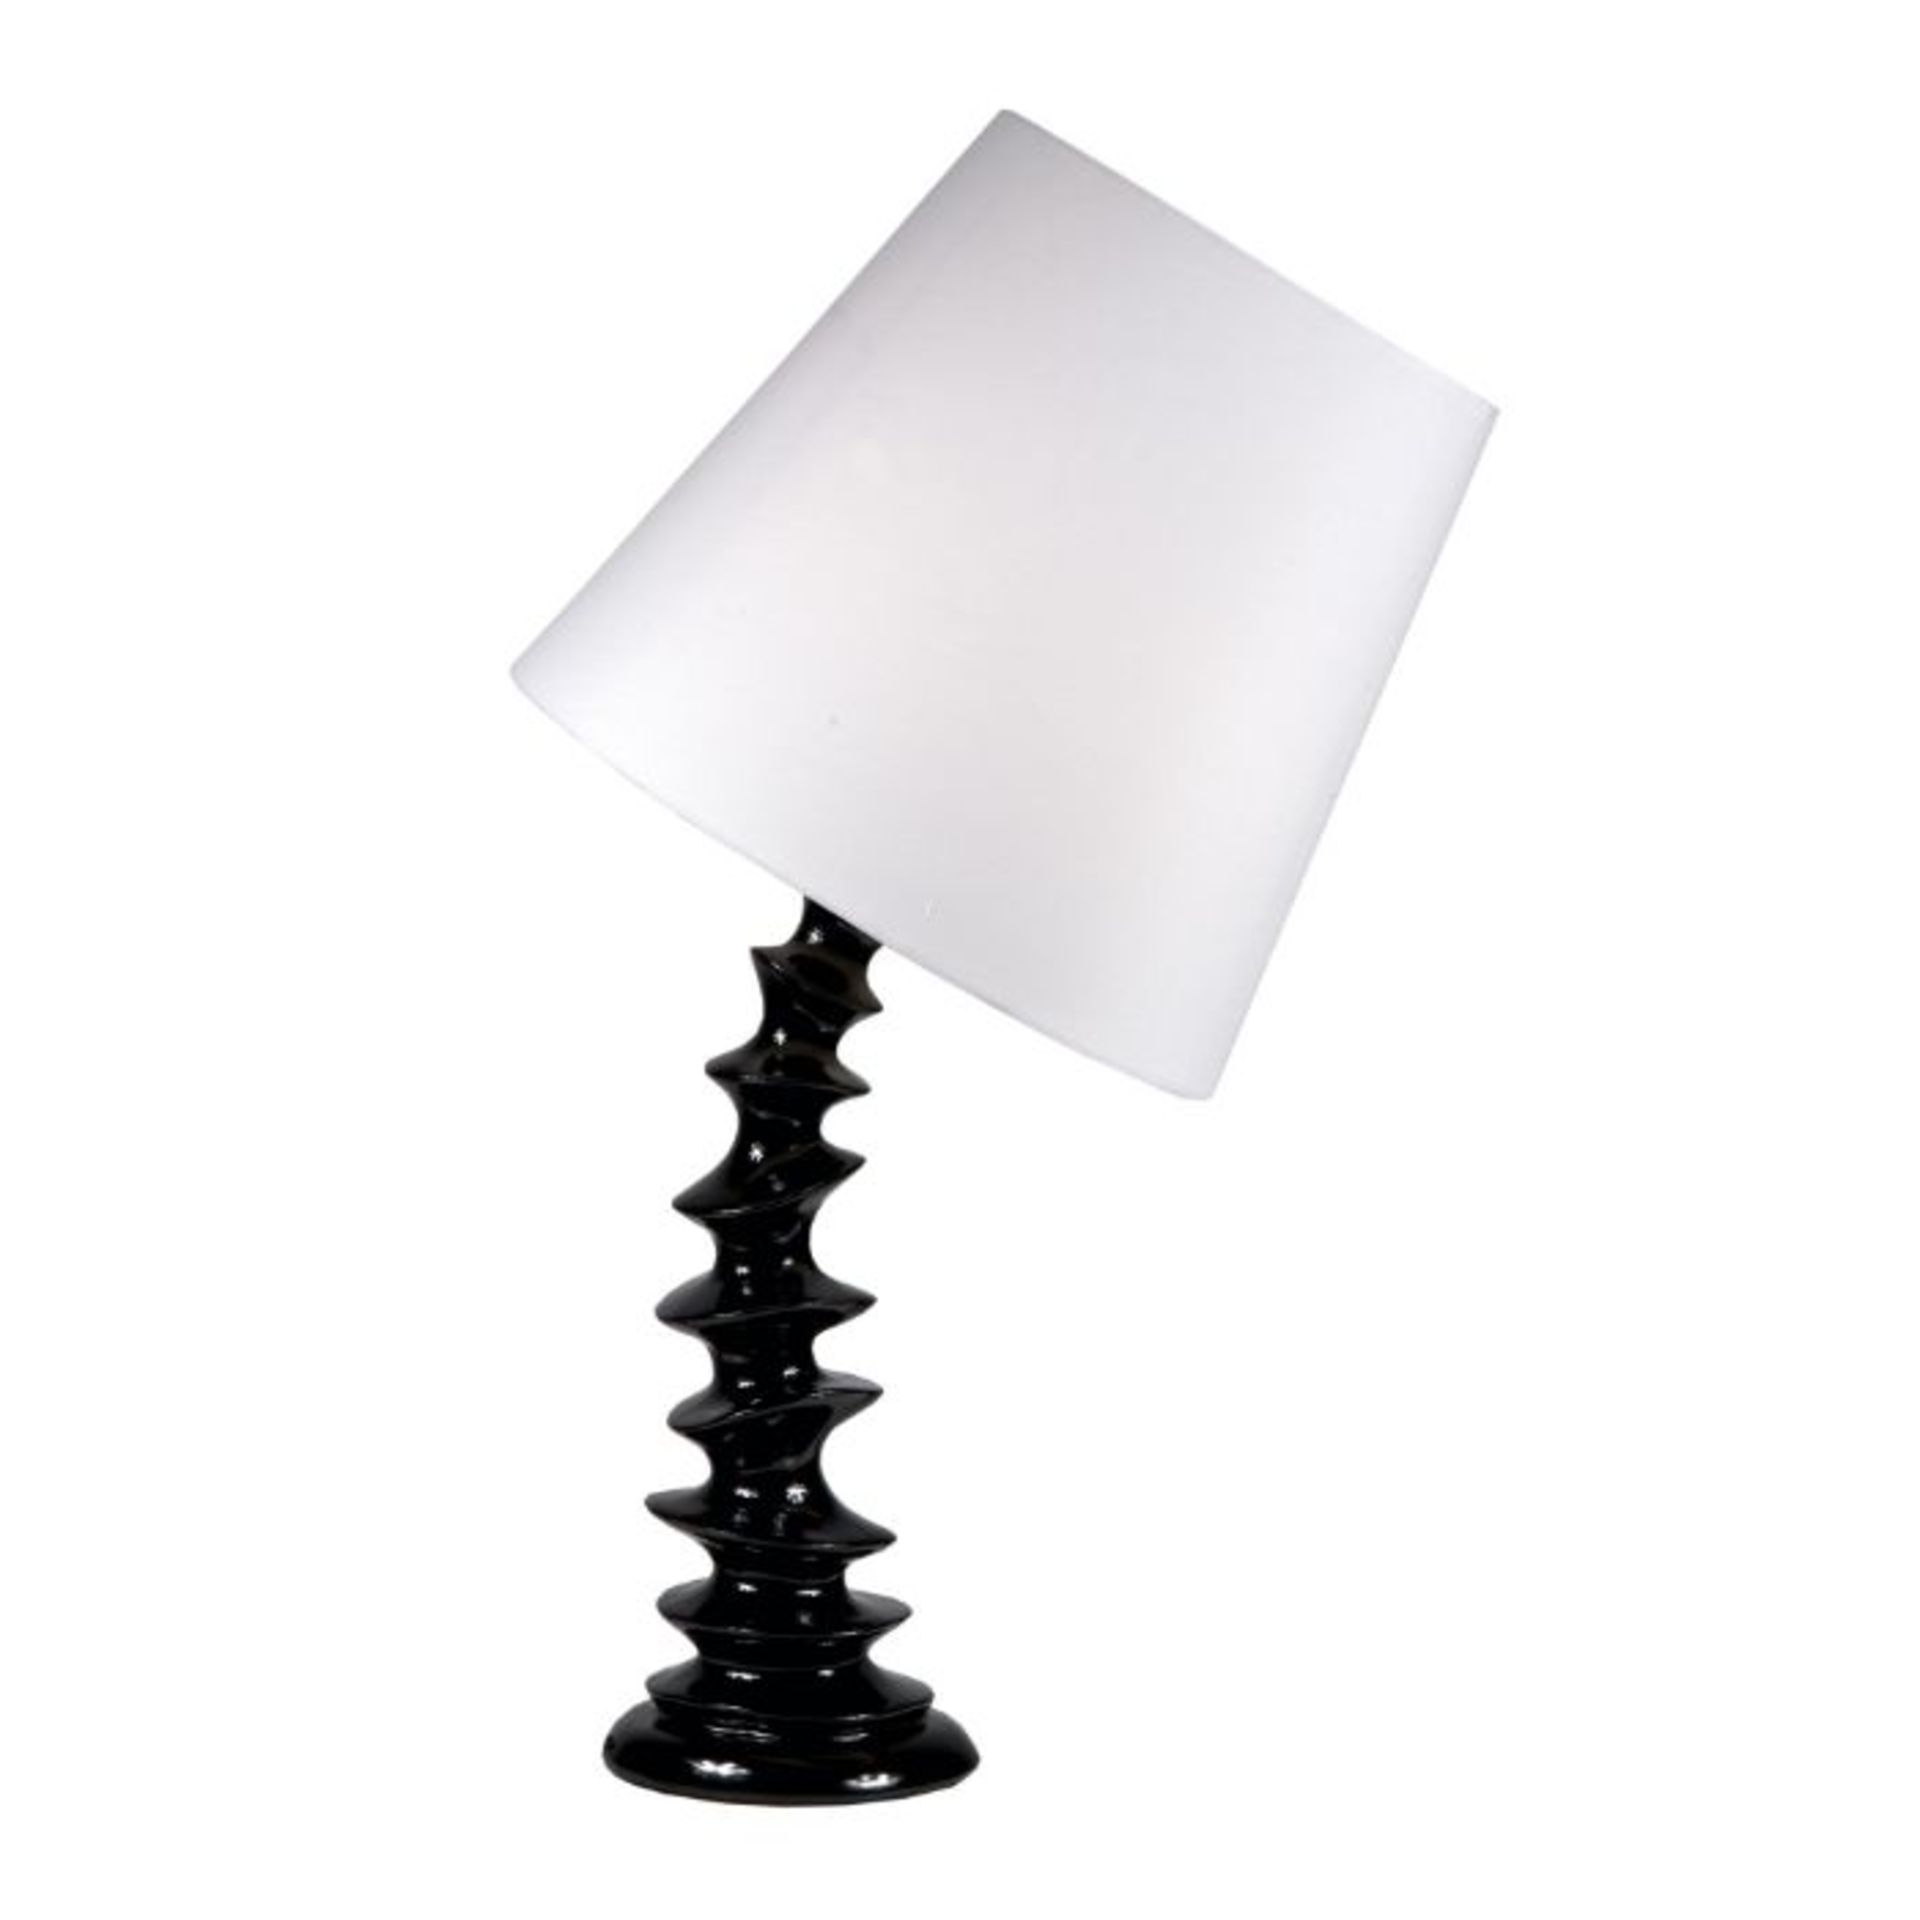 BLACK TABLE LAMP WITH WHITE SHADES APPROX 65CM HIG